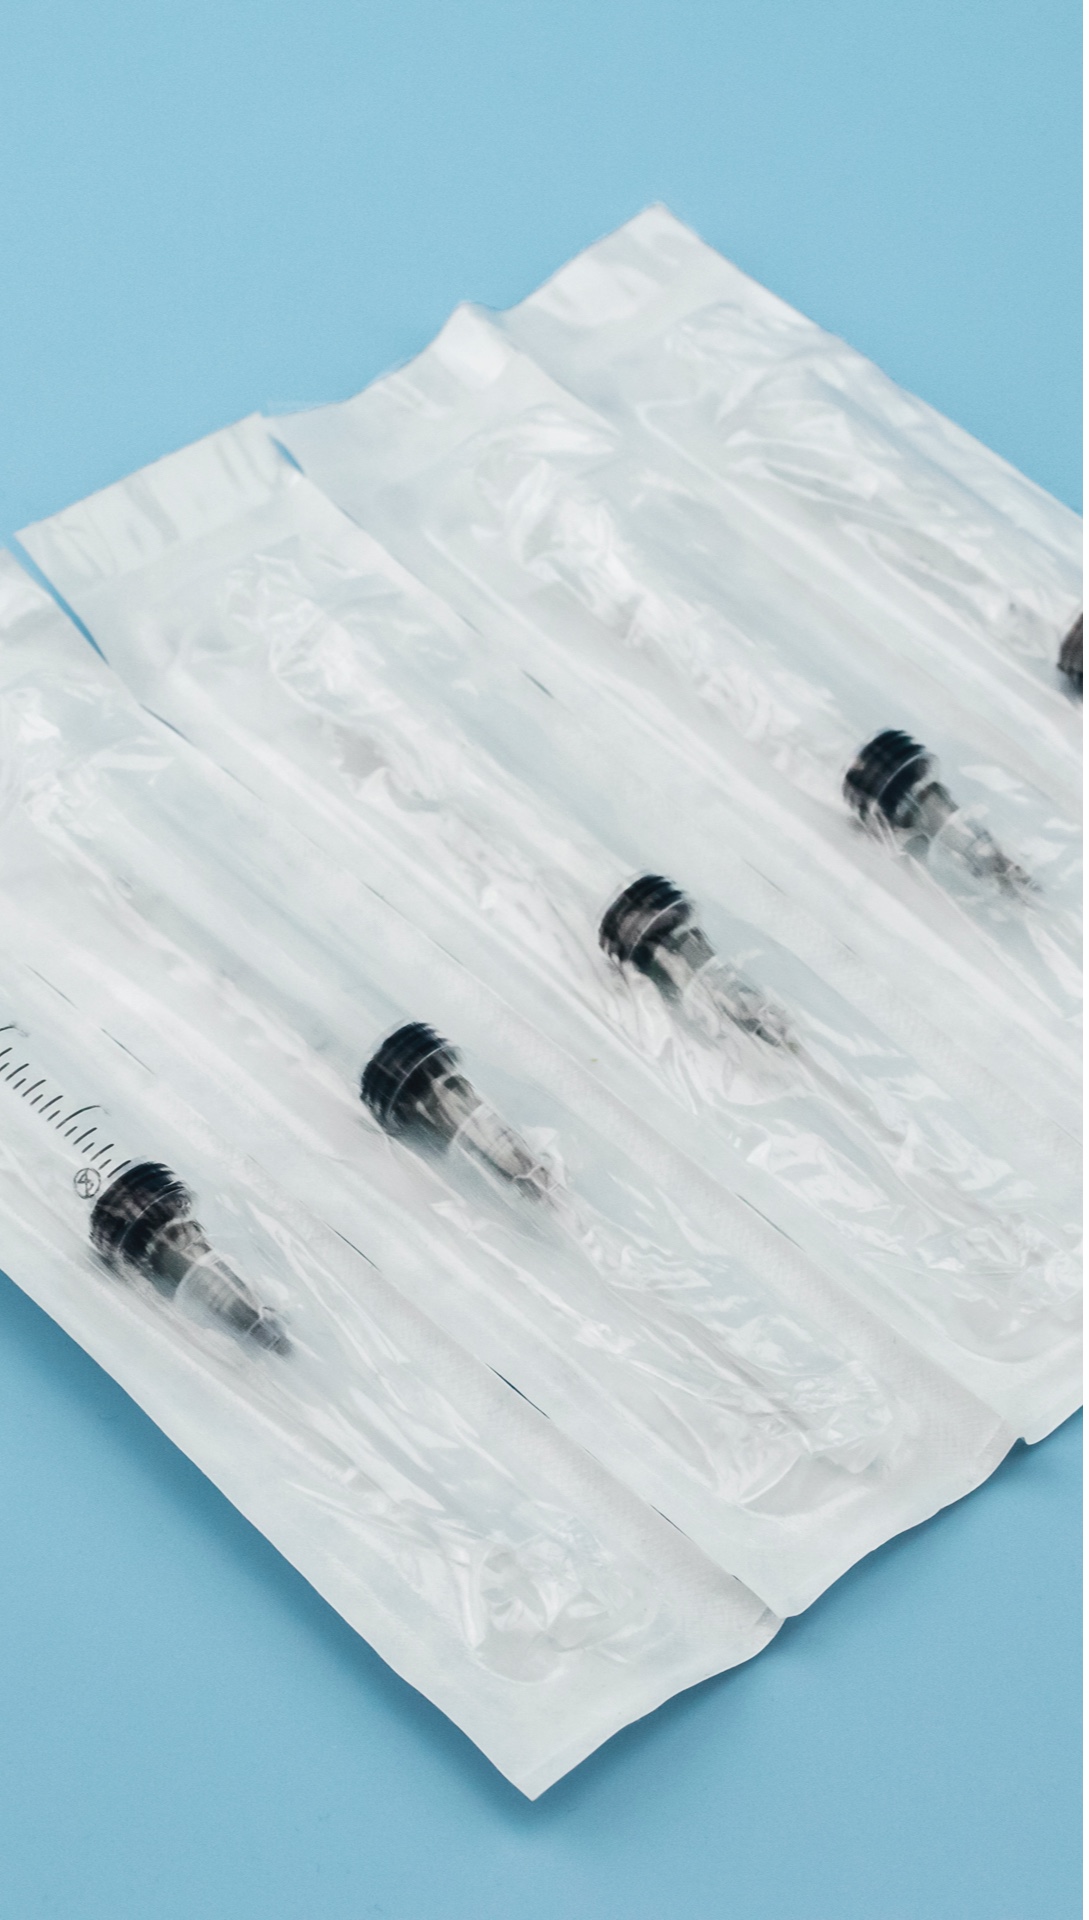 Conventional syringes from SÜDPACK Medica